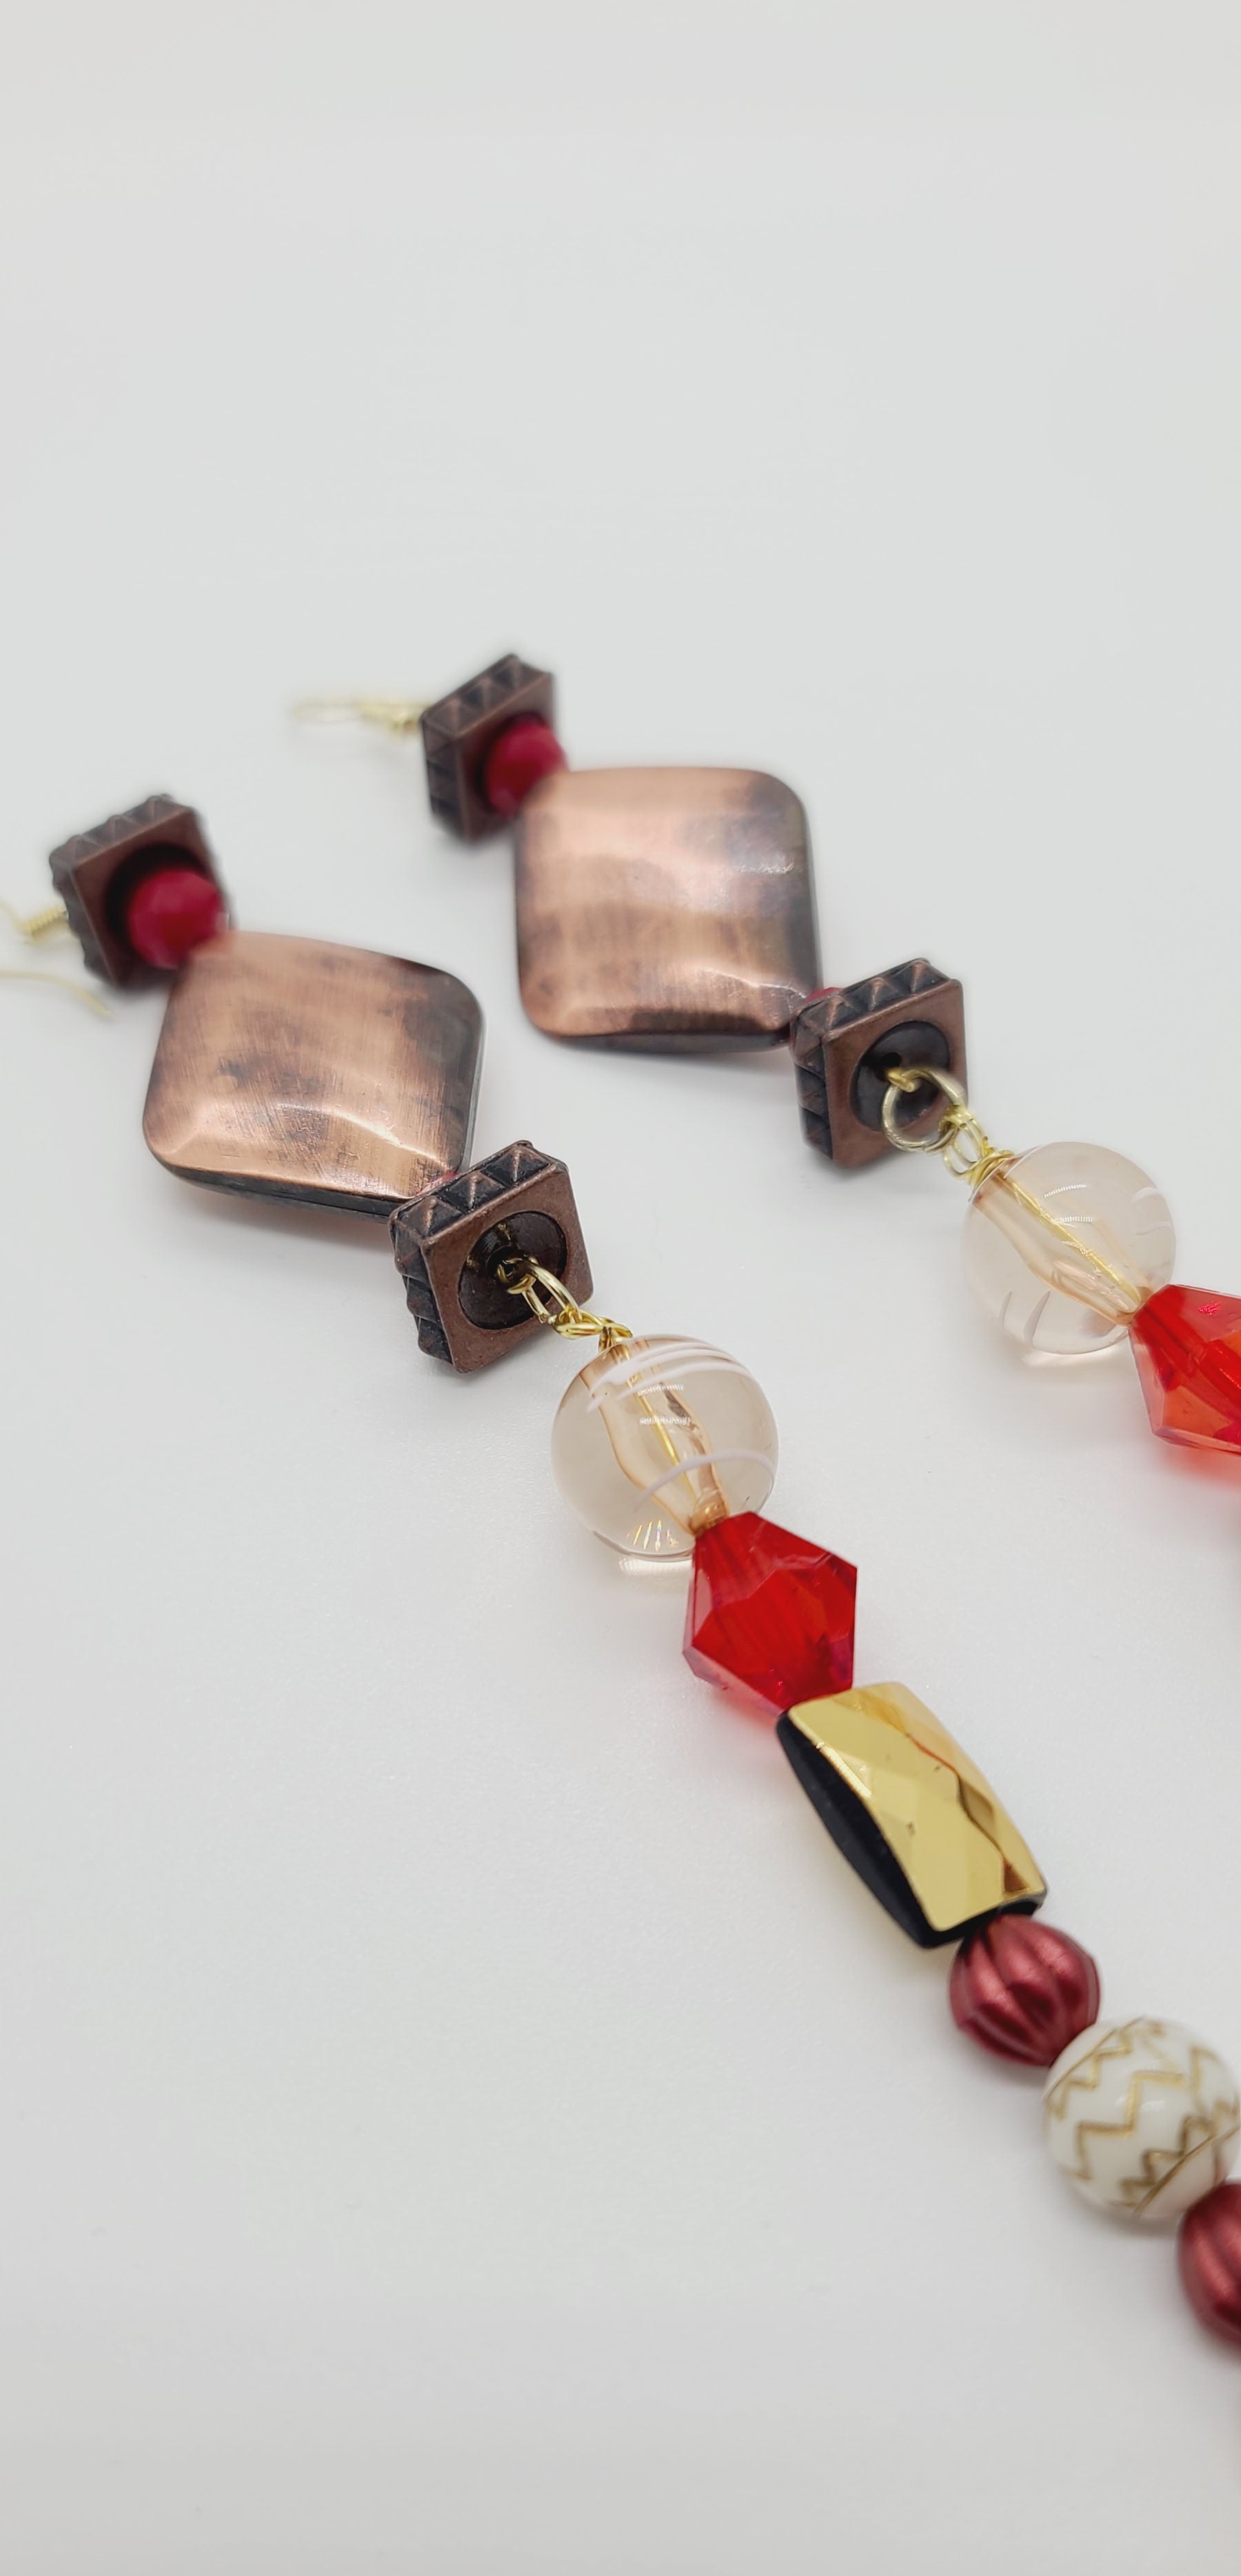 Length: 7 inches | Weight: 1.1 ounces  Distinctly You! These earrings are made with diamond-shaped copper charm, copper square rondelles, 6mm red glass faceted beads,10mm red faceted resin beads, 12mm clear and white glass beads, 10mm clear gold emerald cut beads, 6mm copper beads, 8mm gold carved white beads, copper spacers, 4mm red and tan beads.